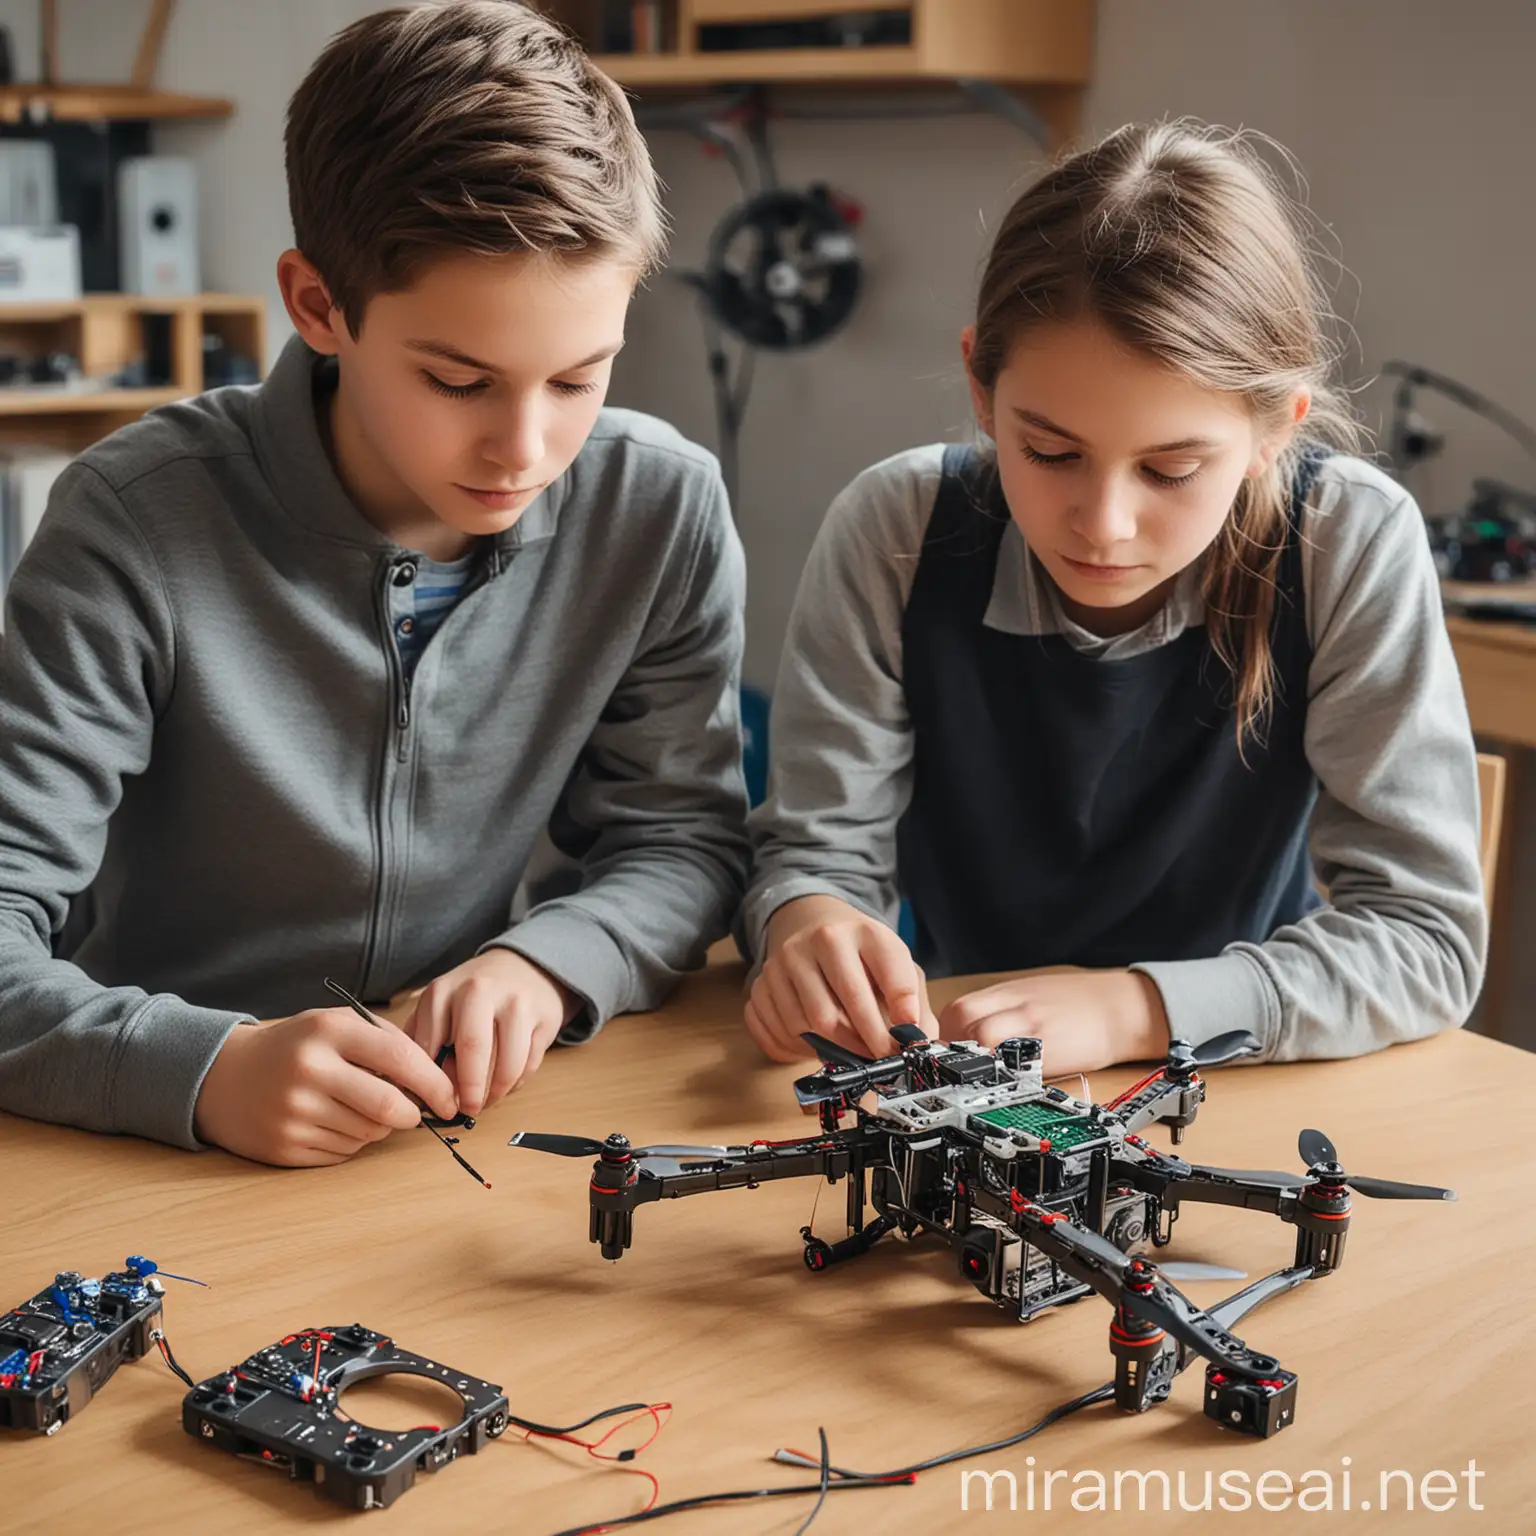 Teenage Students Building FPV Quadcopter in Racing Drone Laboratory